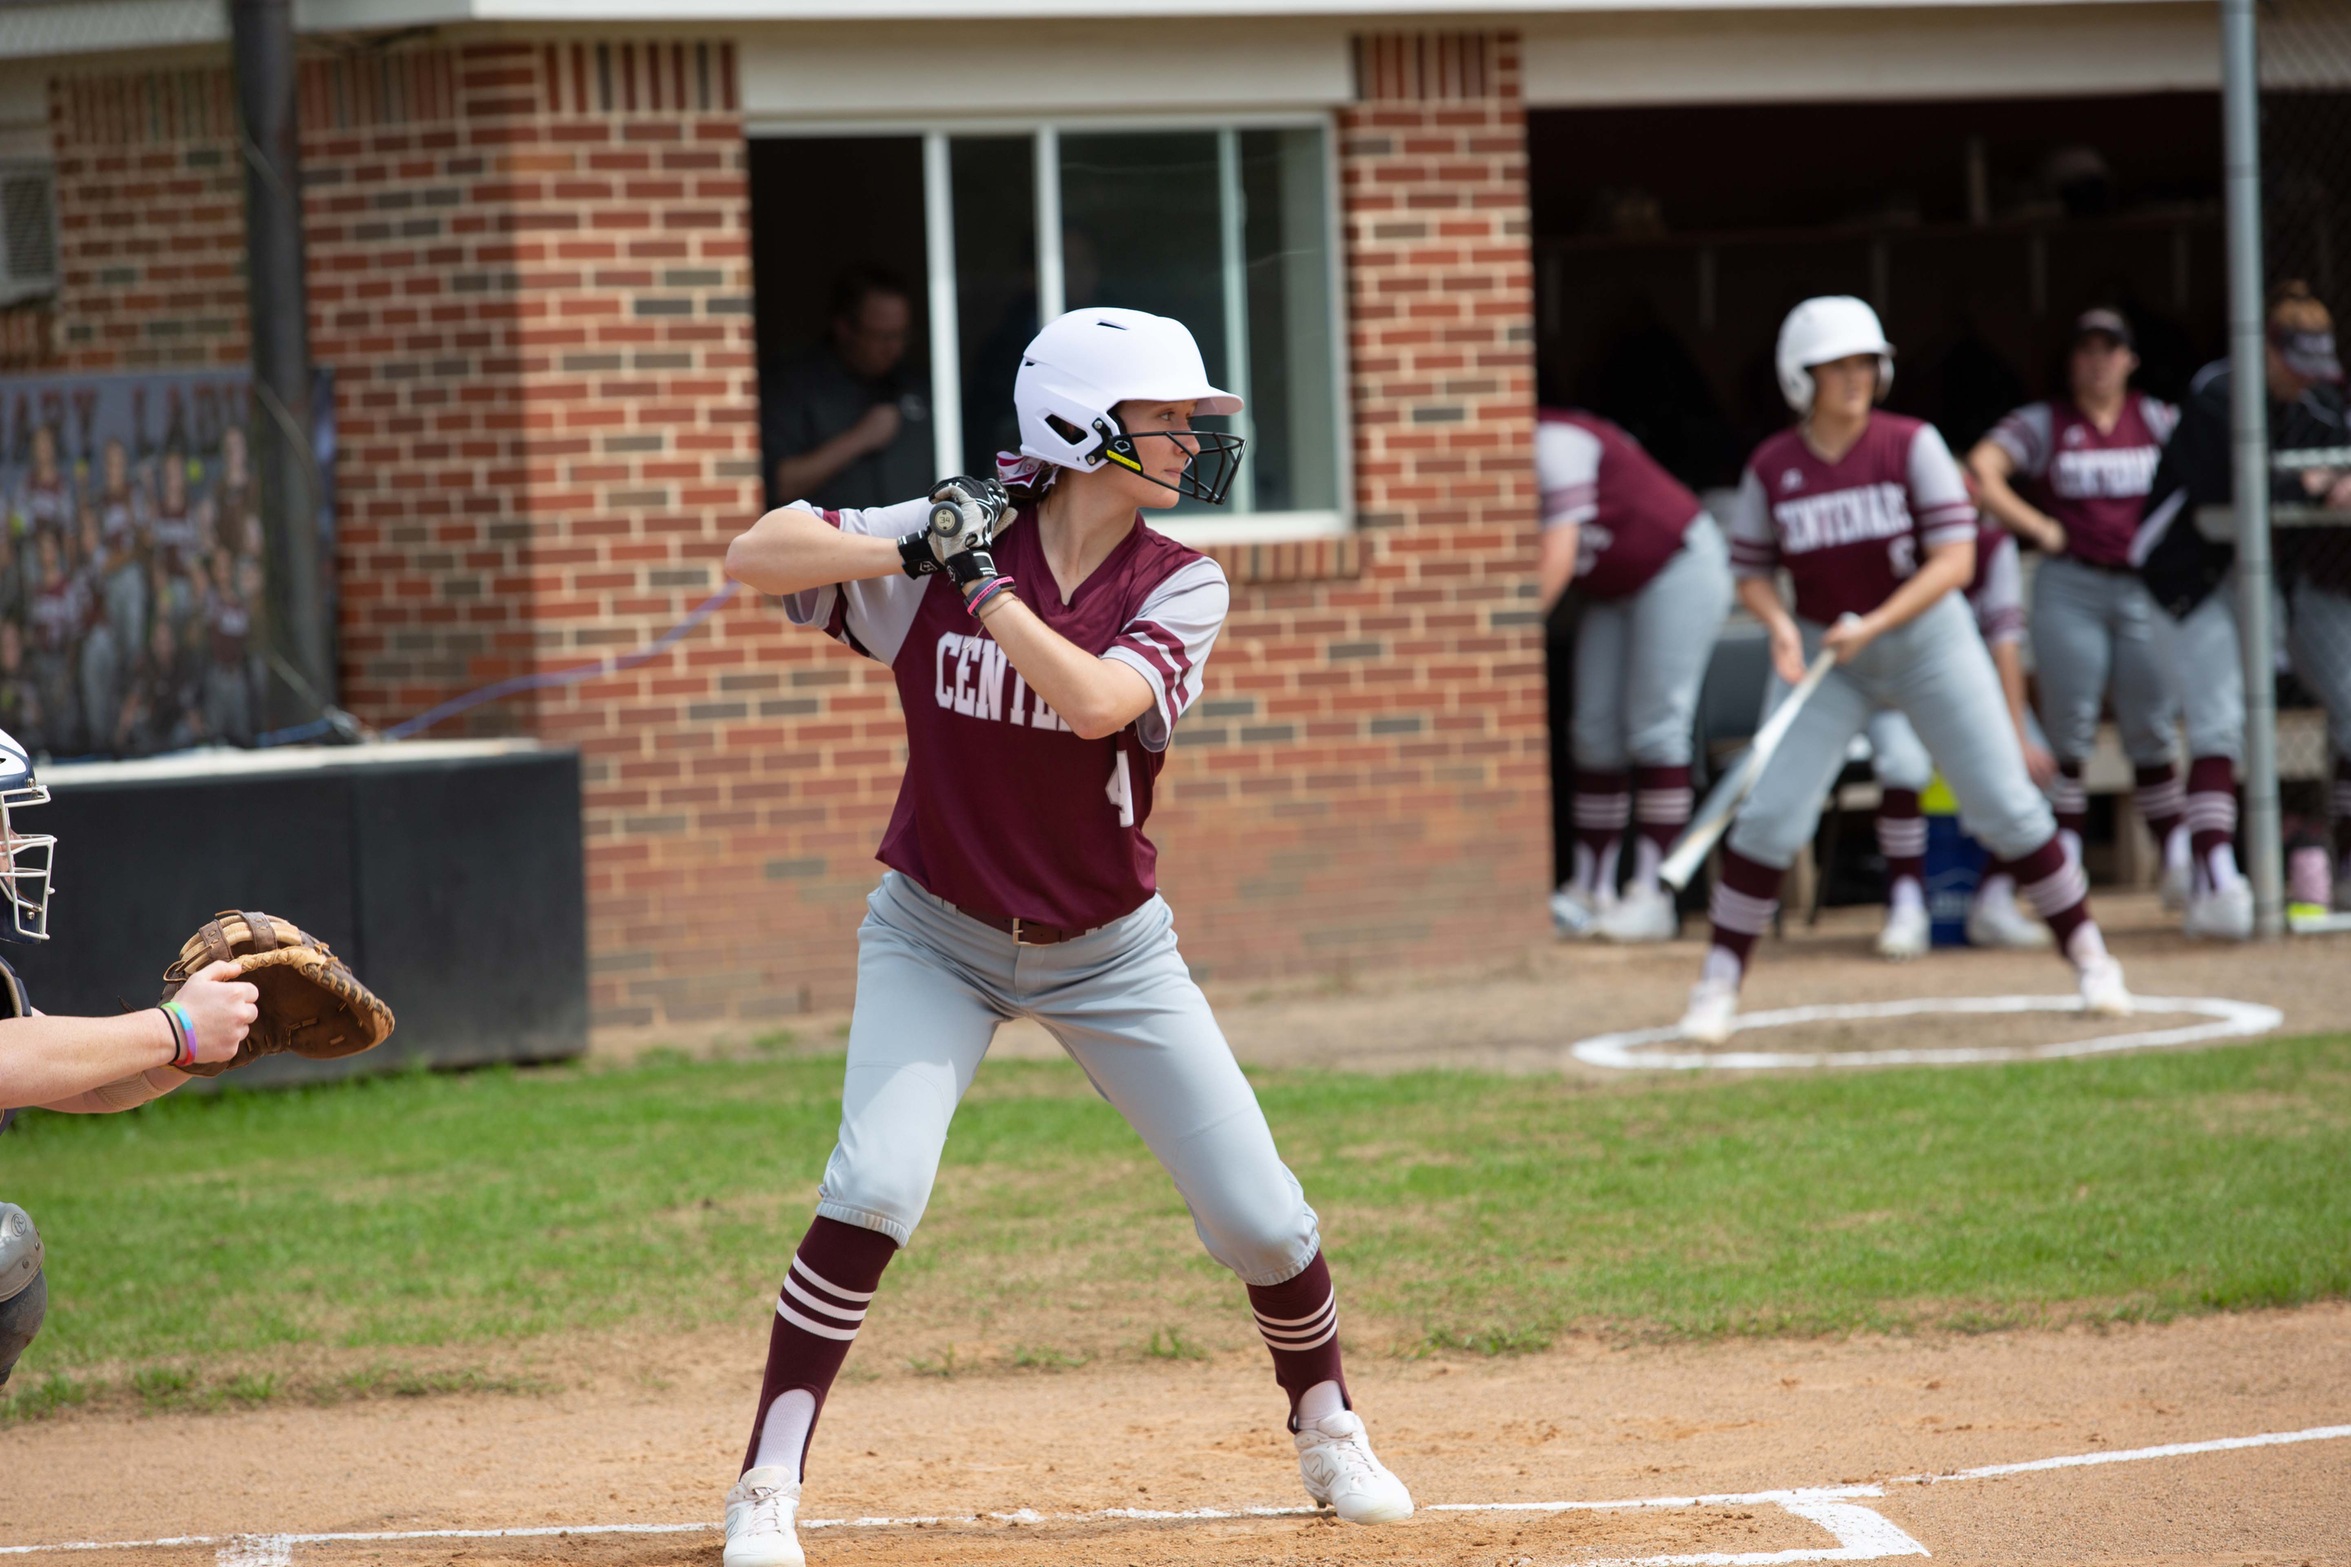 Softball Swept in DH Saturday by St. Thomas